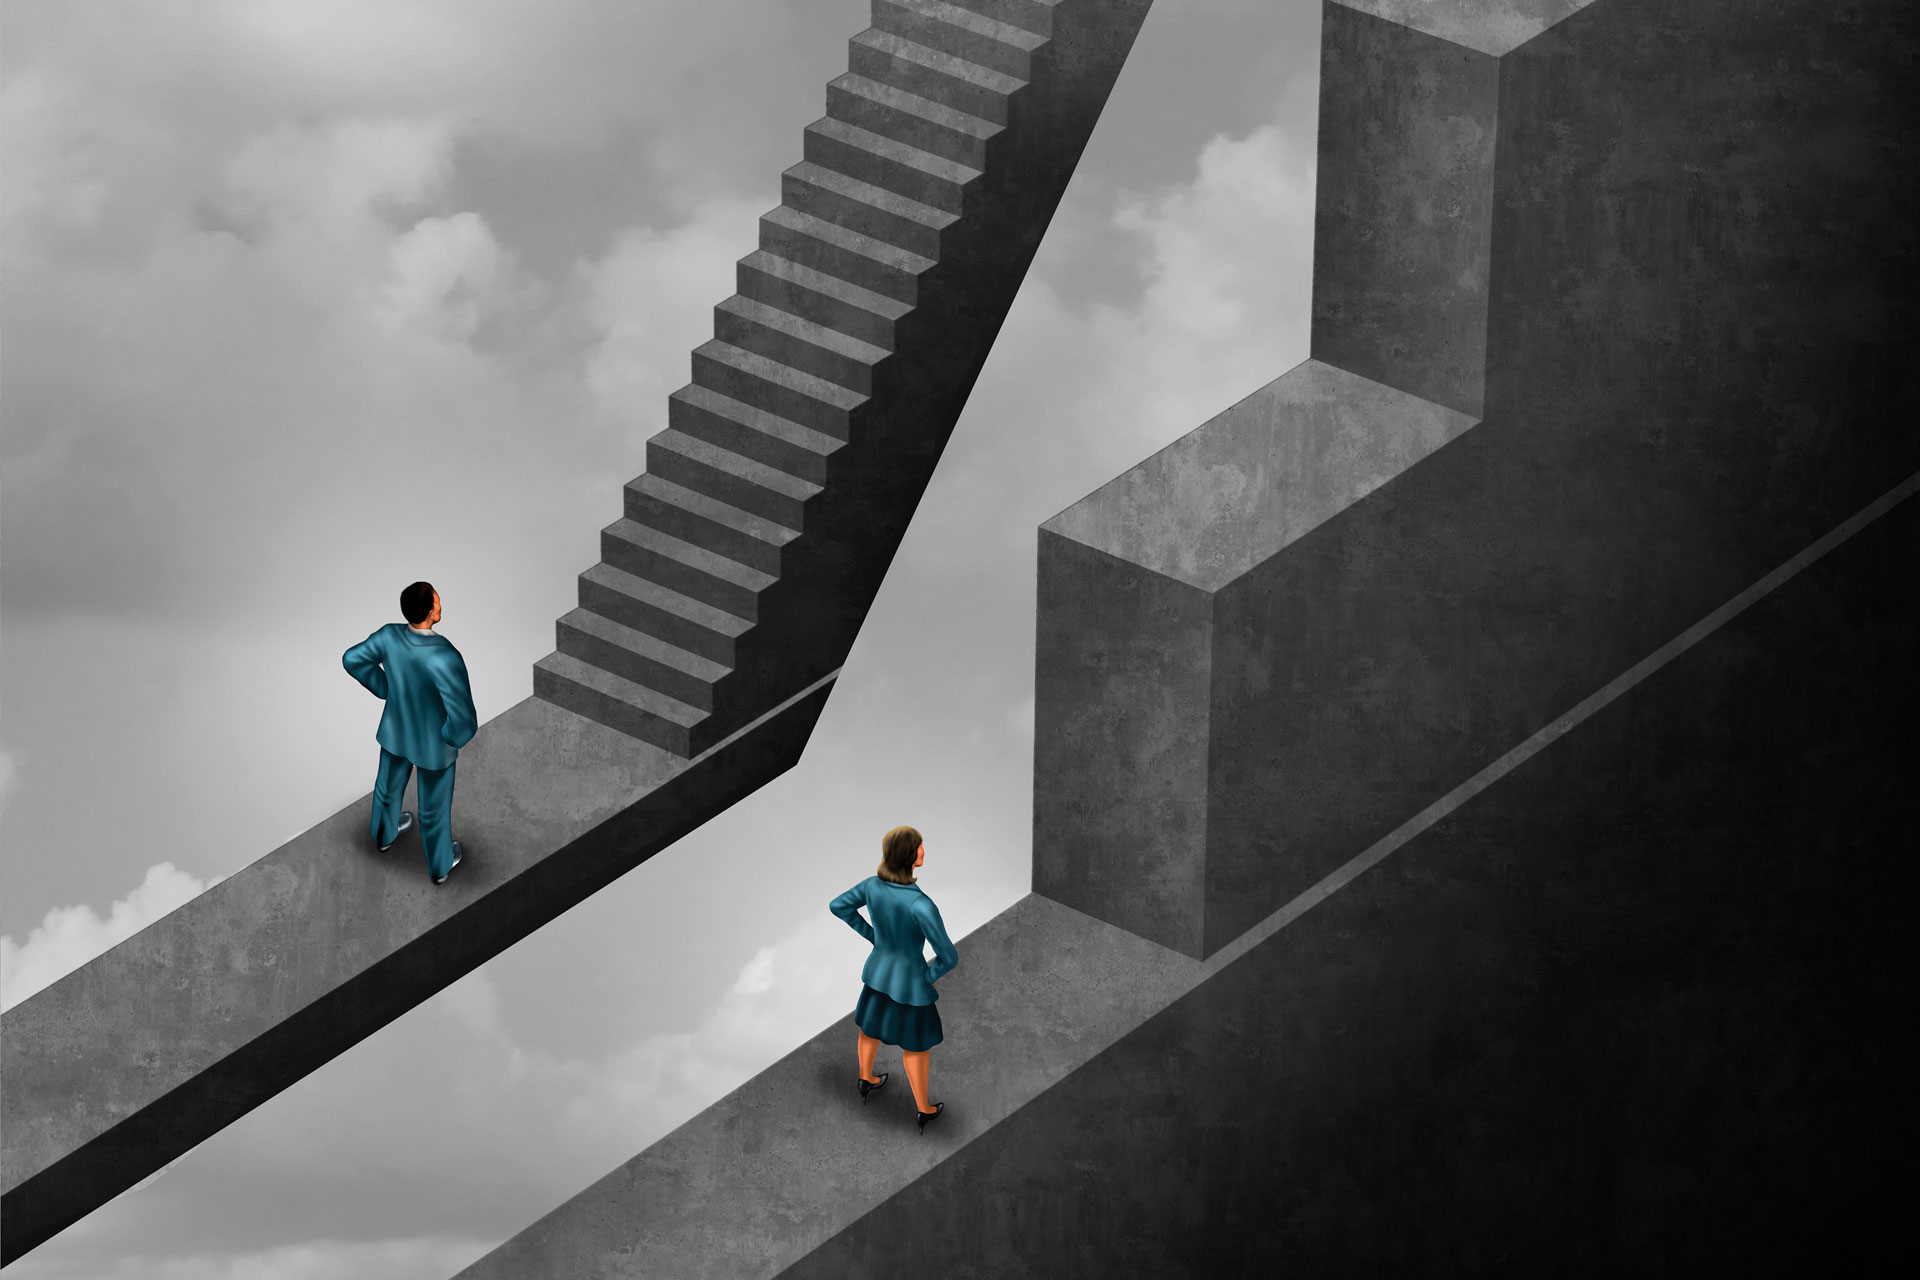 Woman facing a harder time in image with much larger stairs to scale than a man, intended to represent the funding gap faced by female founders